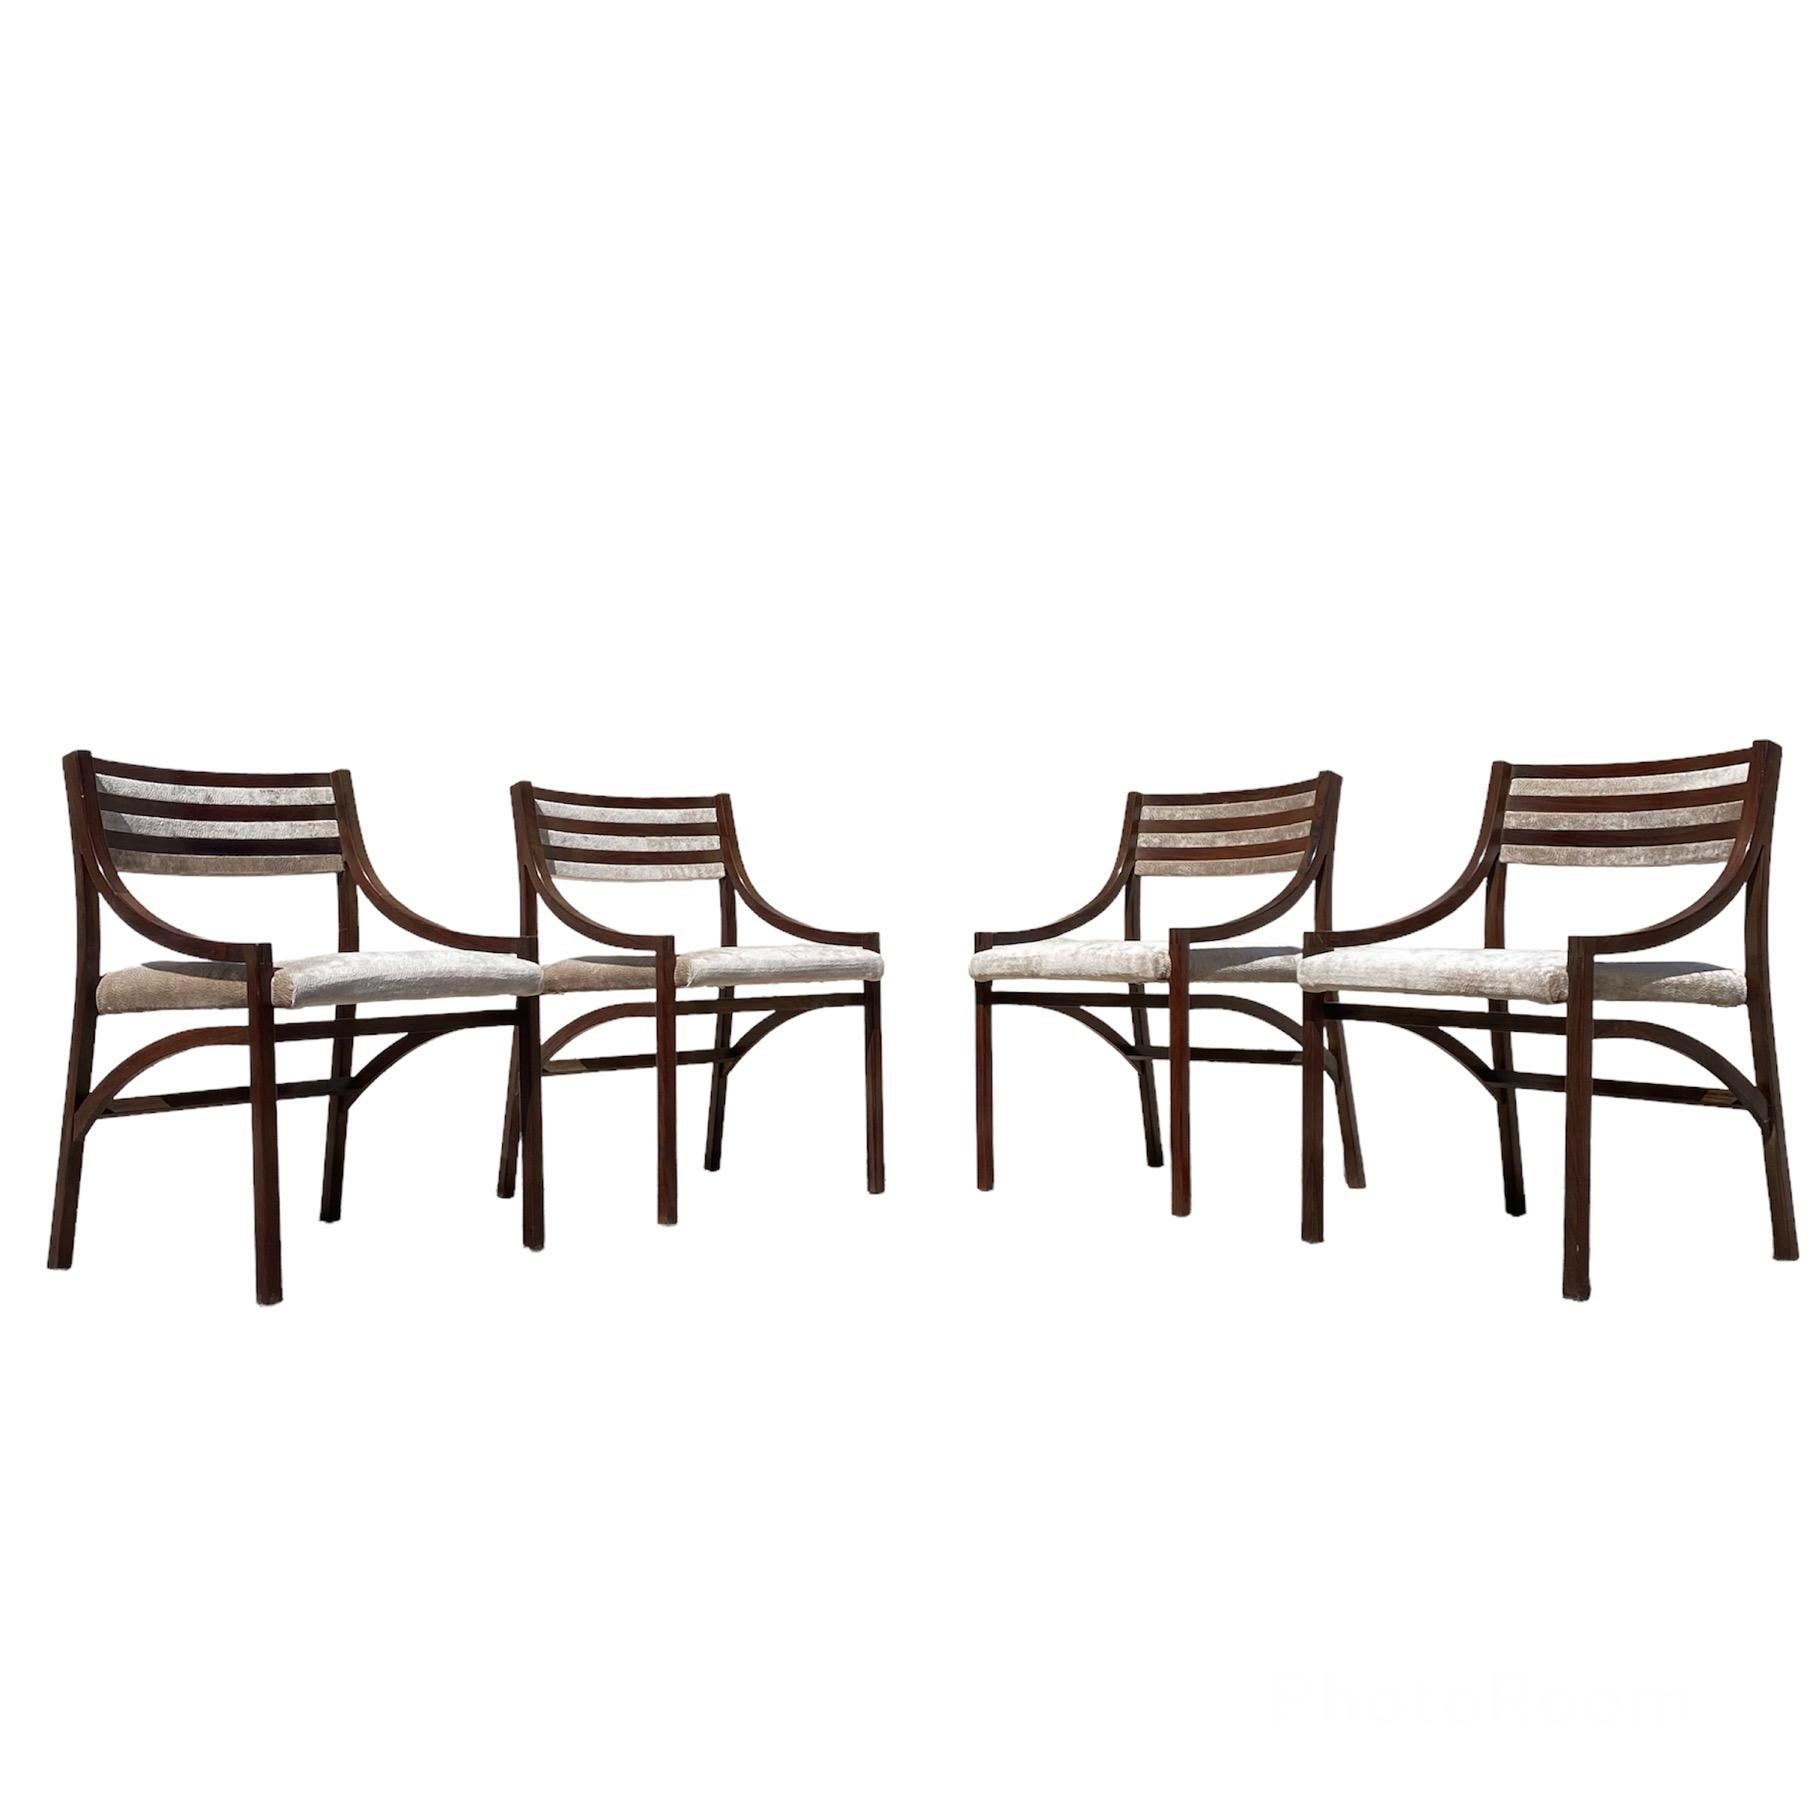 Set of 4 Chairs 